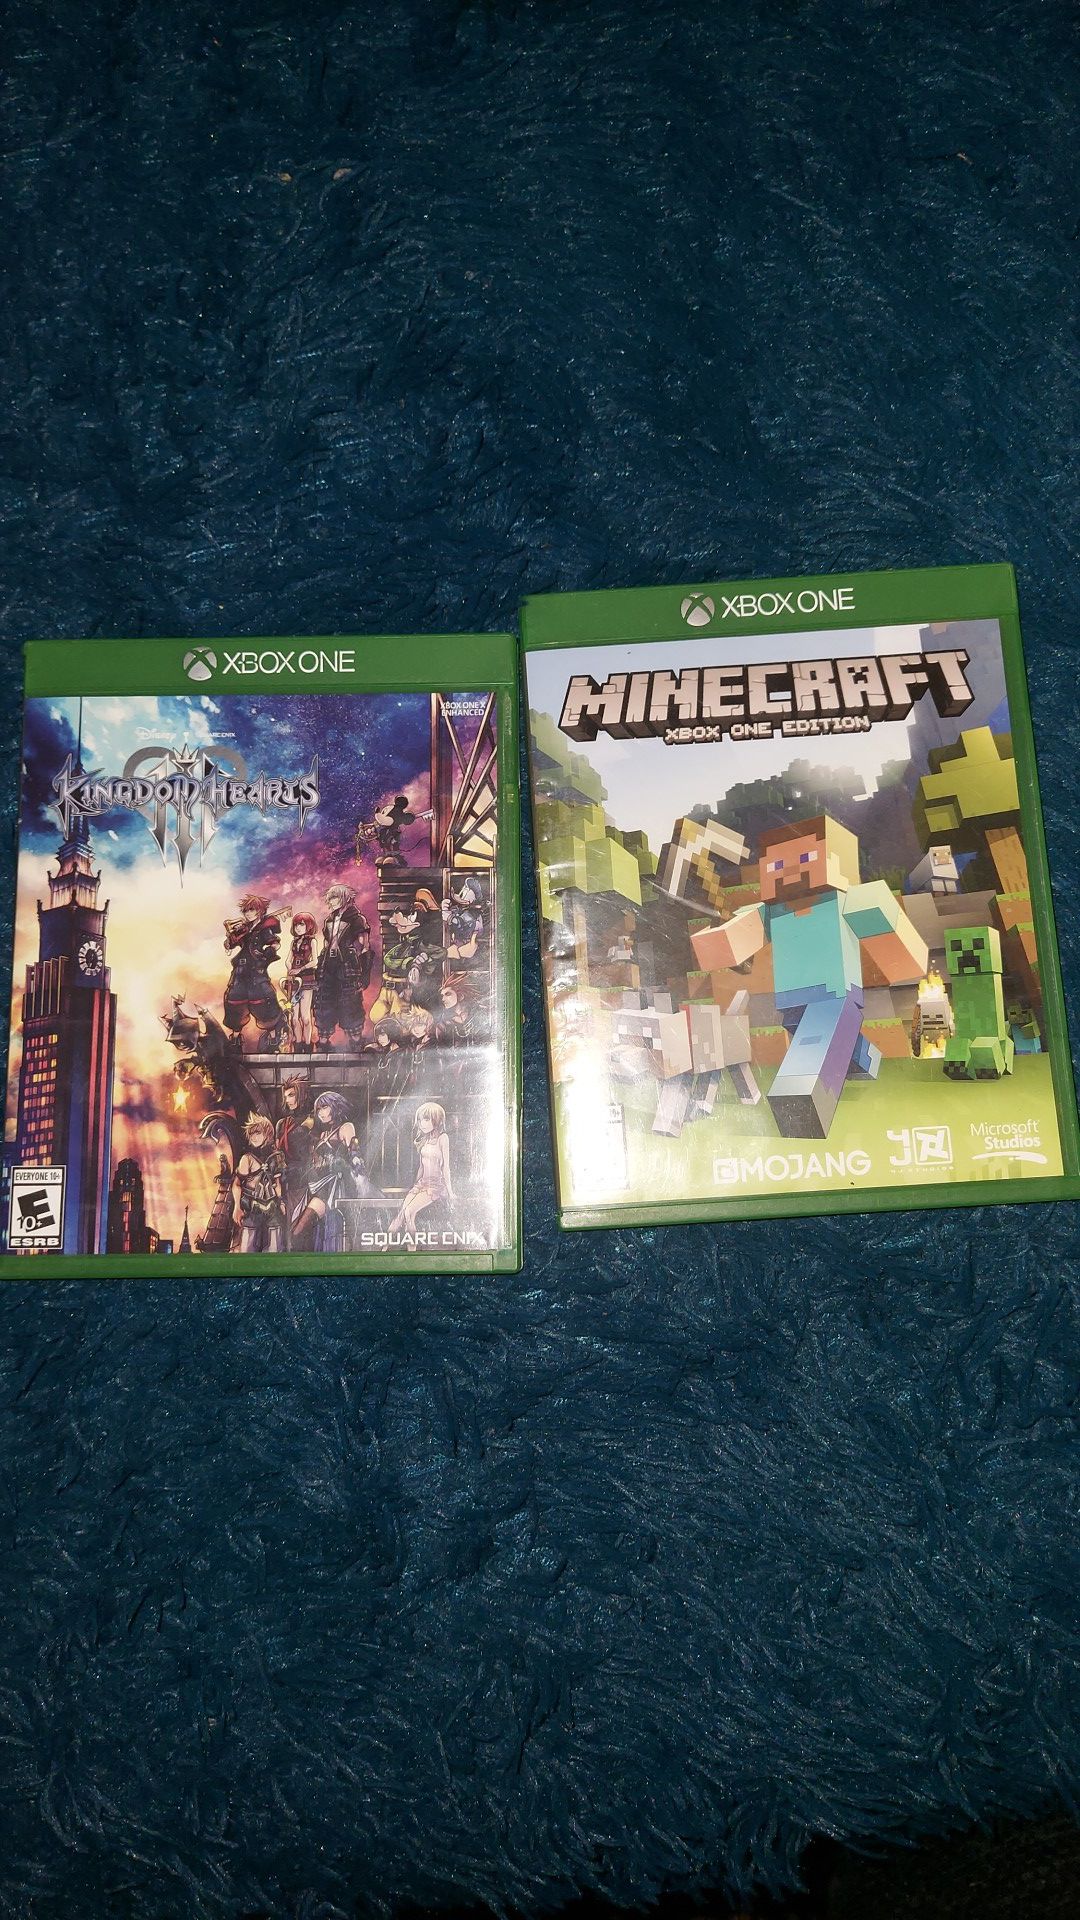 Kingdom Hearts III and Minecraft Xbox One Edition for Xbox One